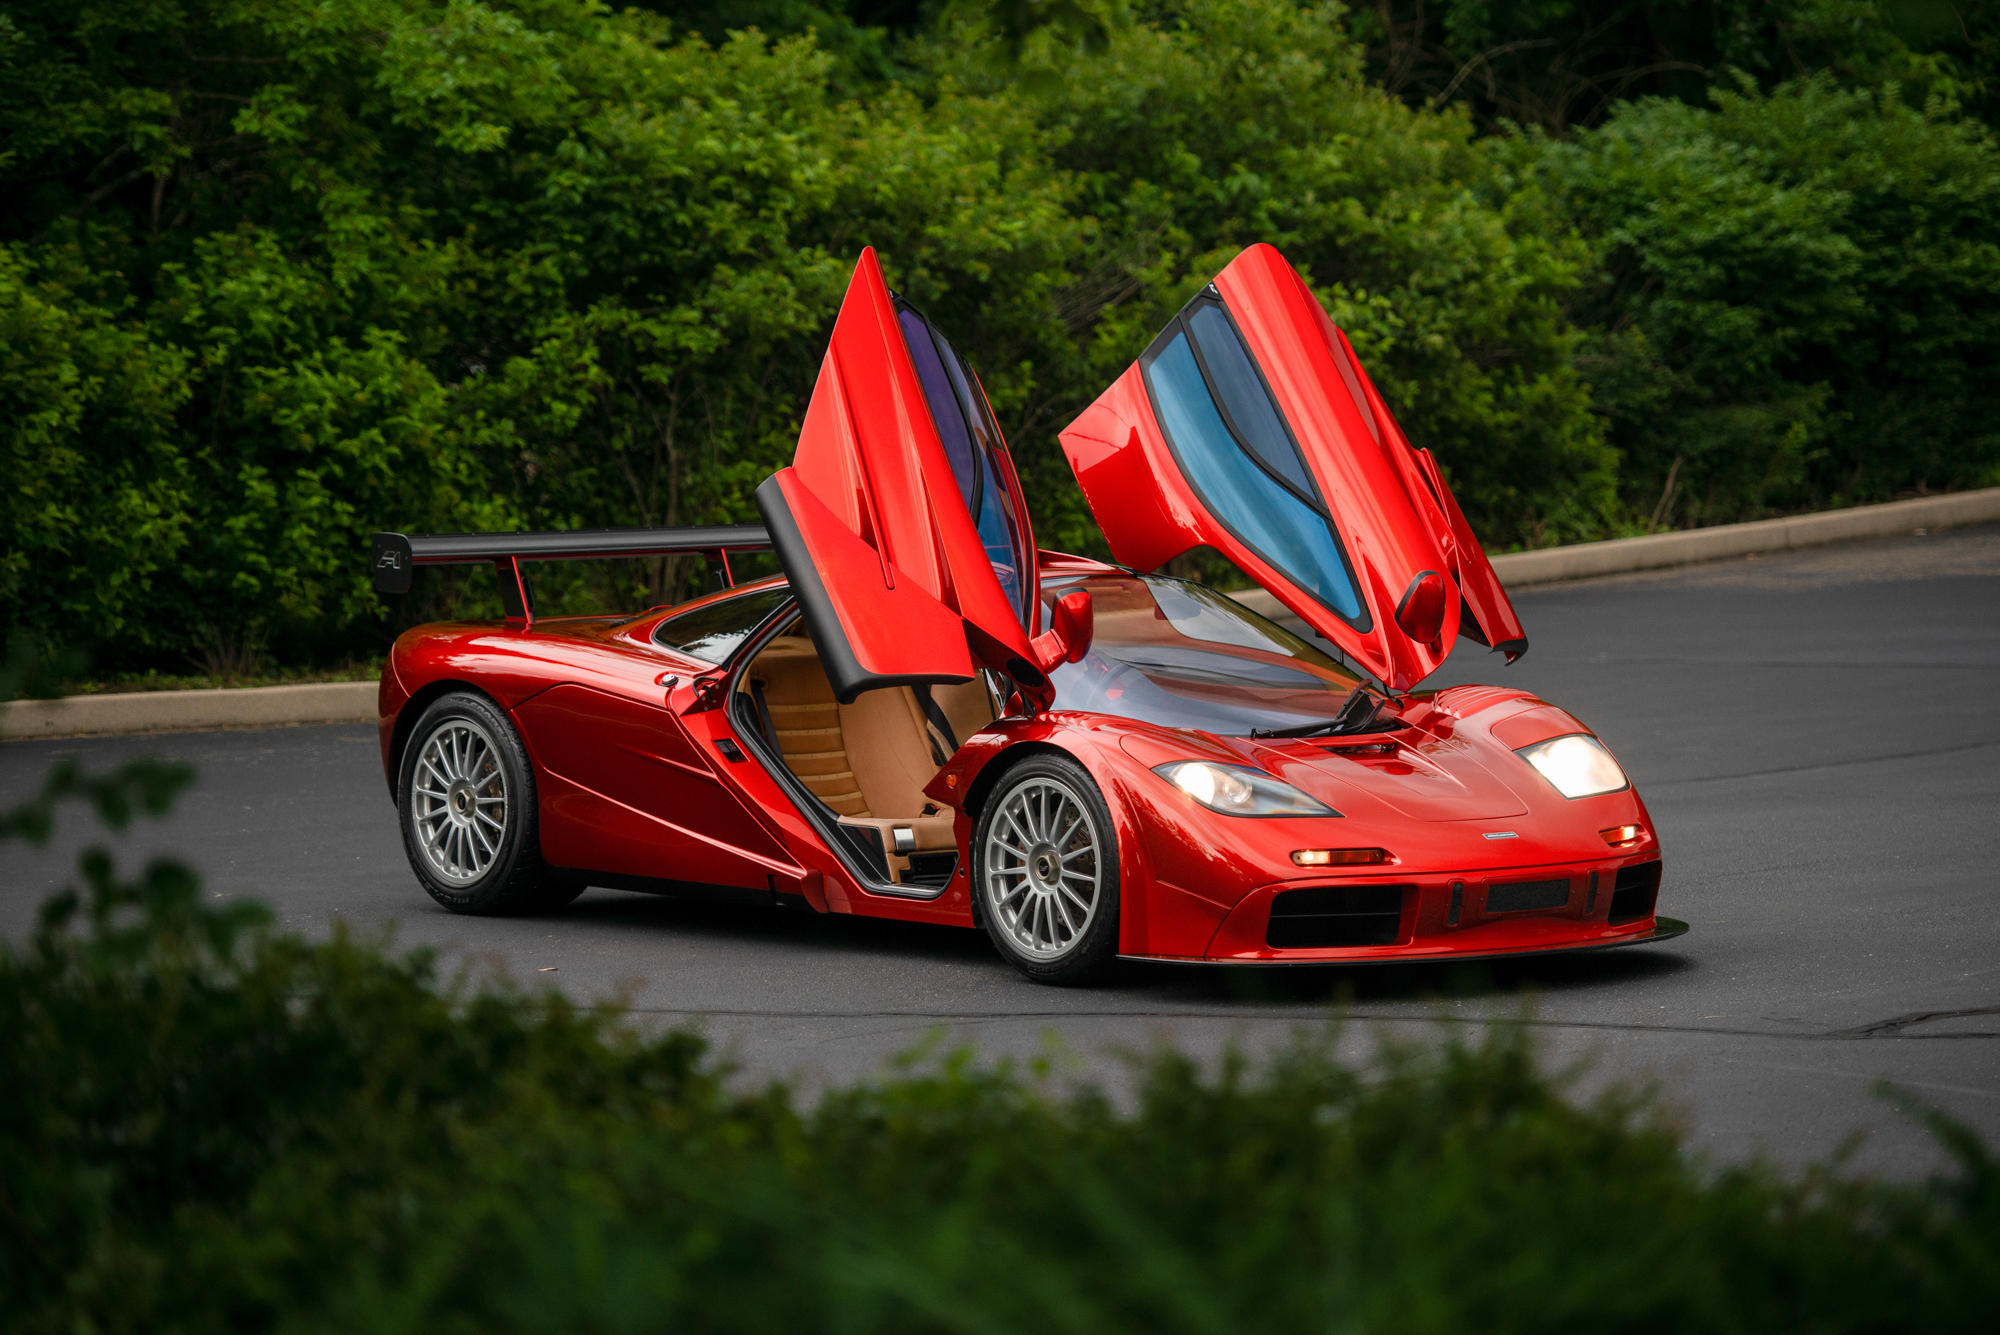 Gensidig Fryse forbi This street-legal 1998 McLaren F1 LM is up for sale, again